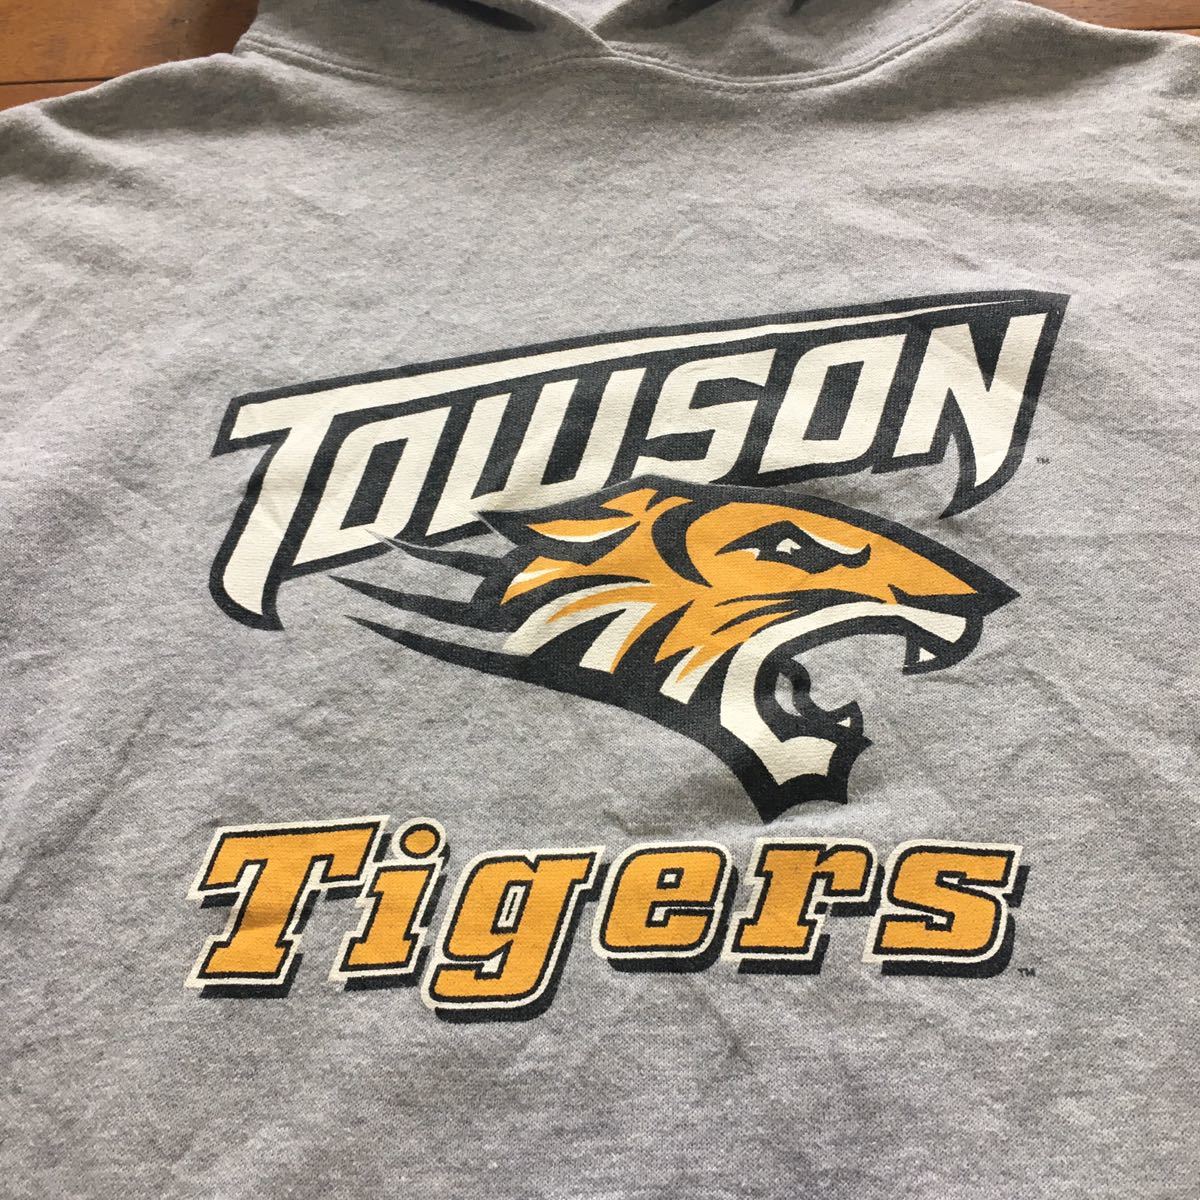 ☆【 THE TOWSON 】★ Made in USA tigers カレッジスエットパーカー ★サイズL_画像2